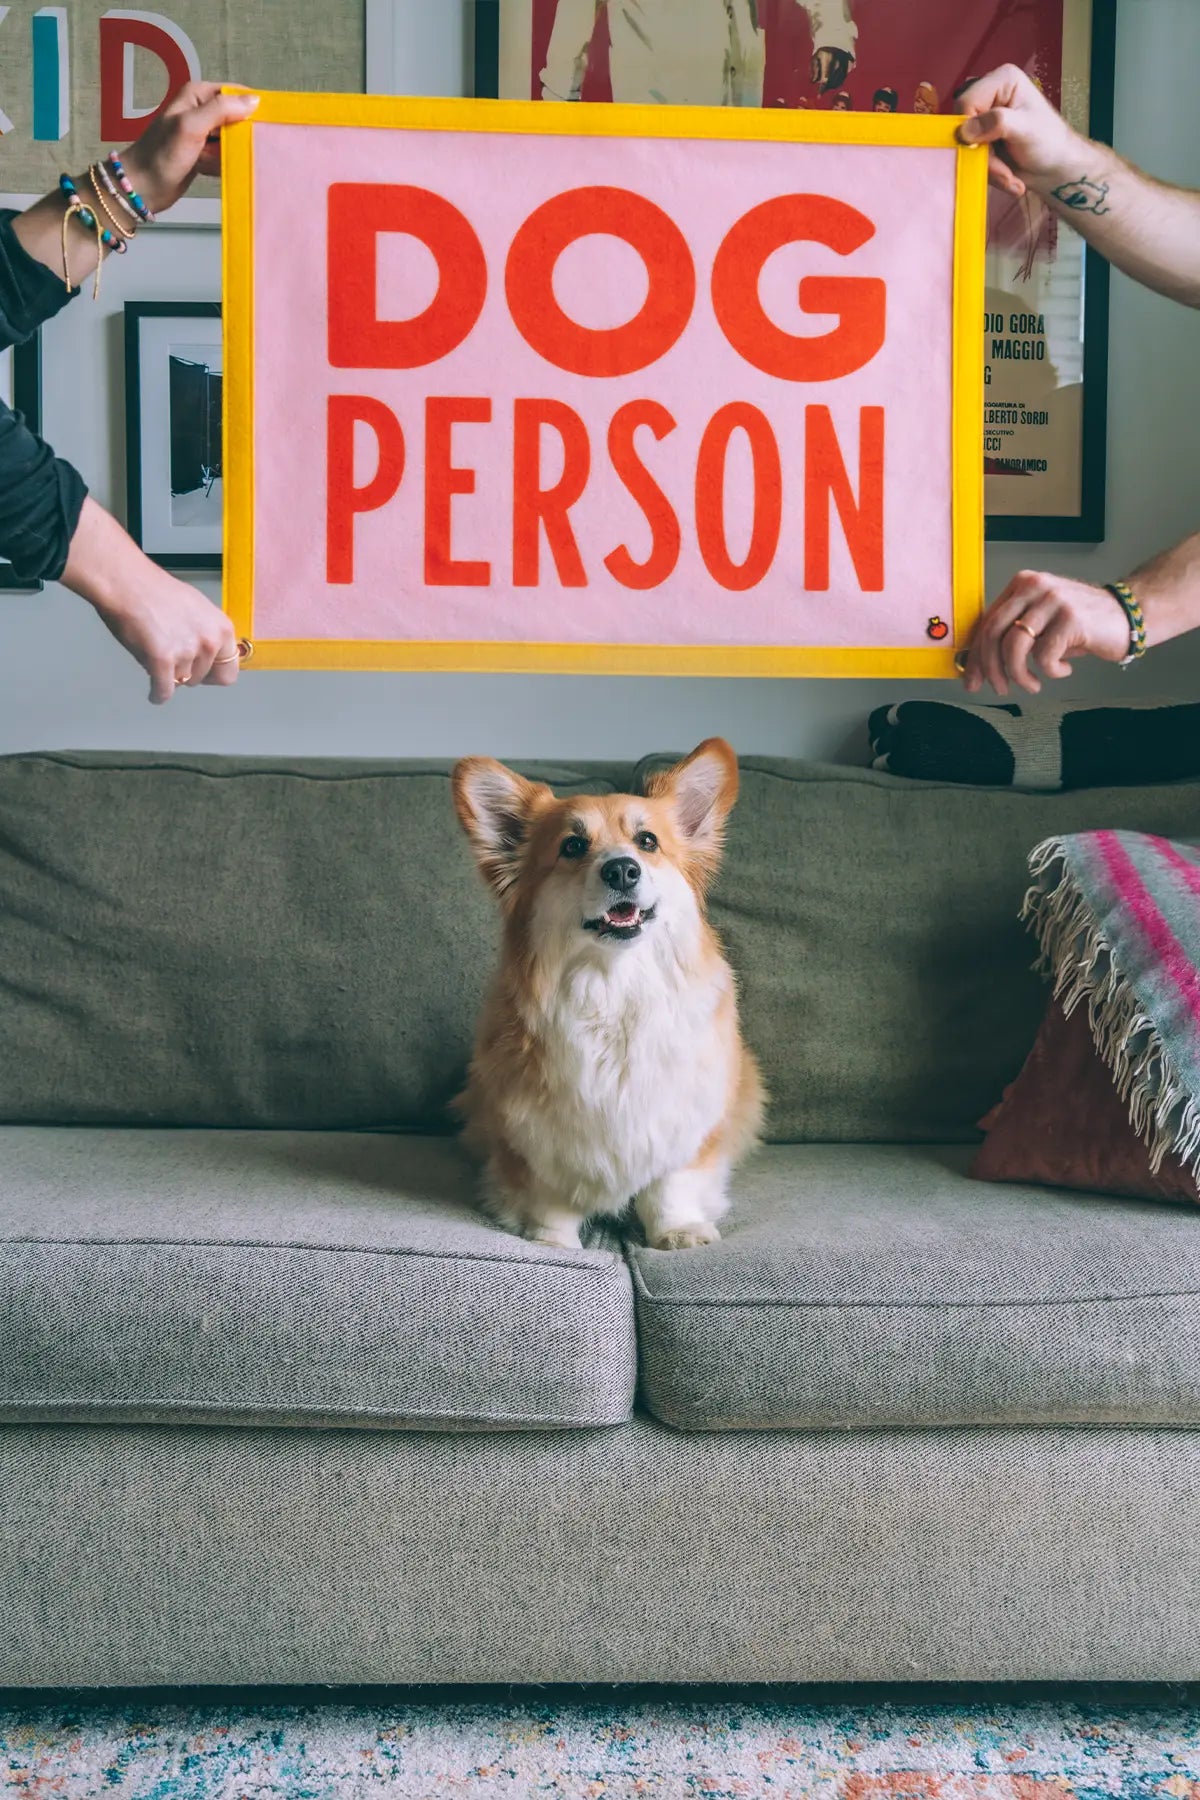 Dog Person Camp Banner